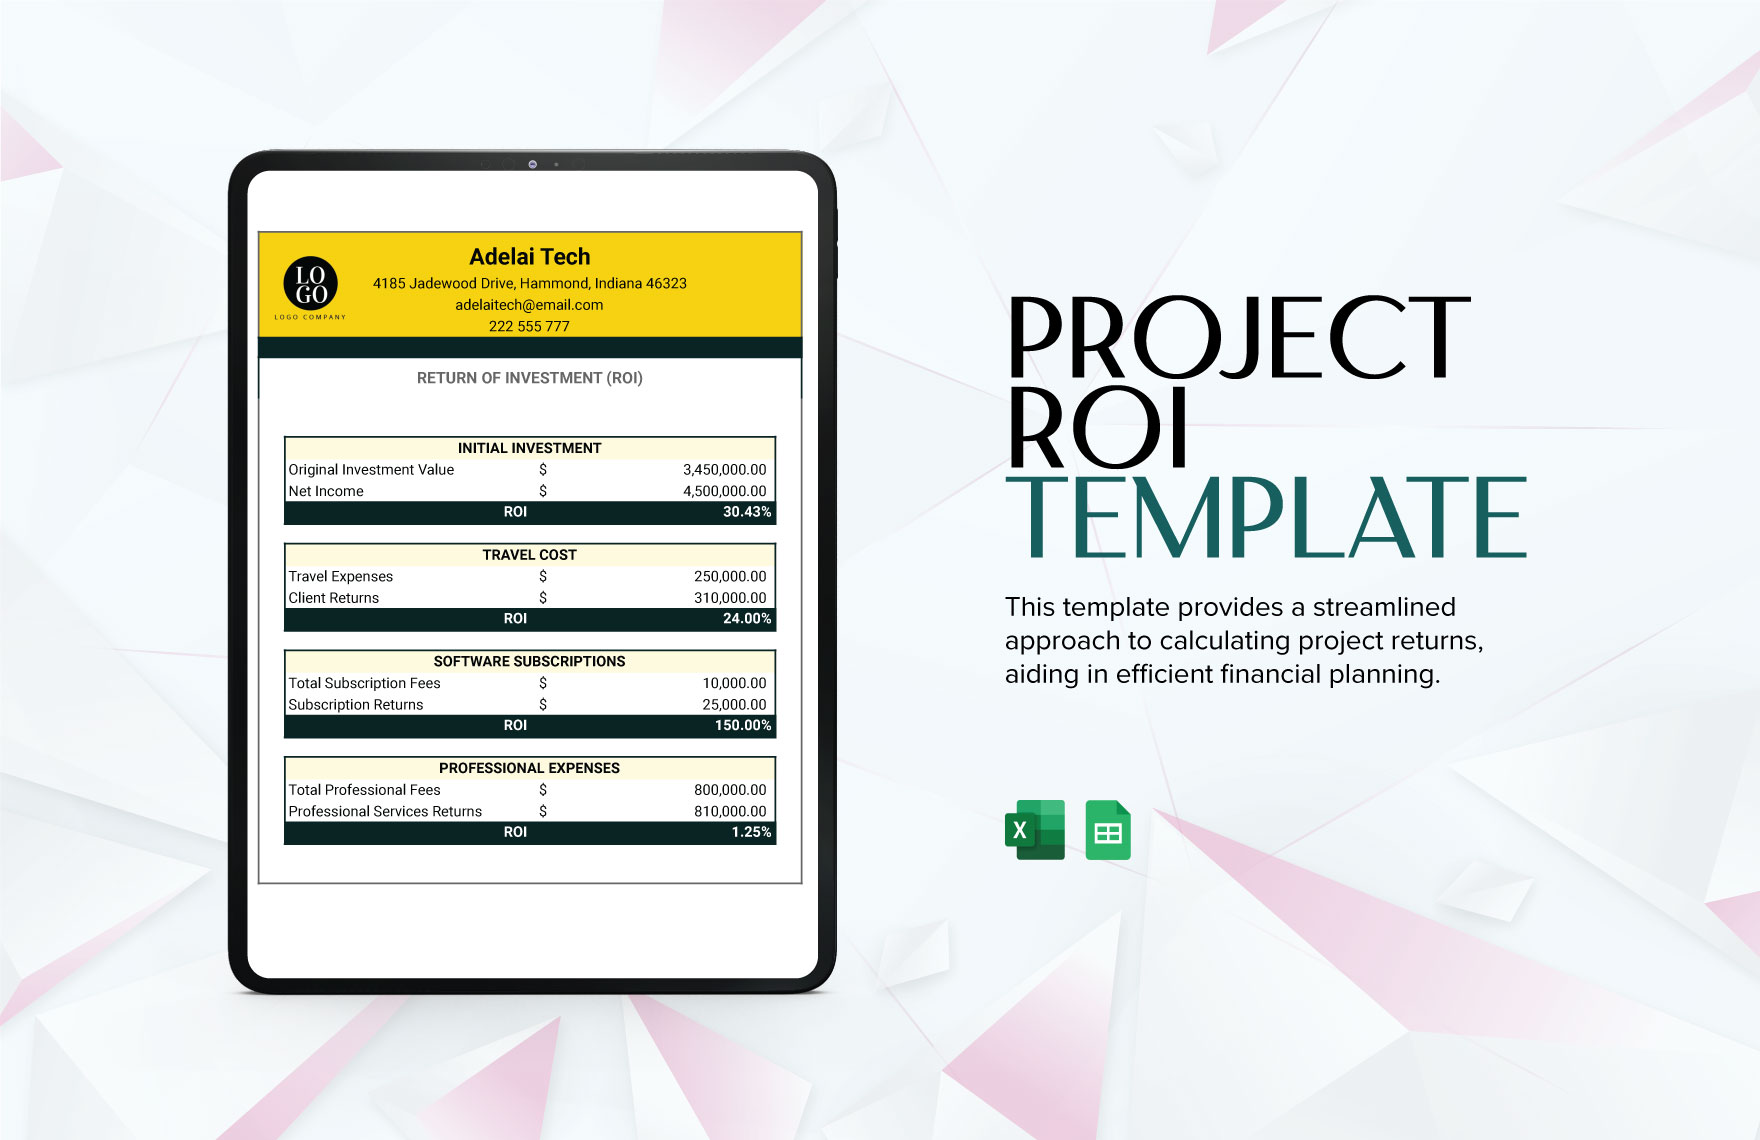 Project ROI Template